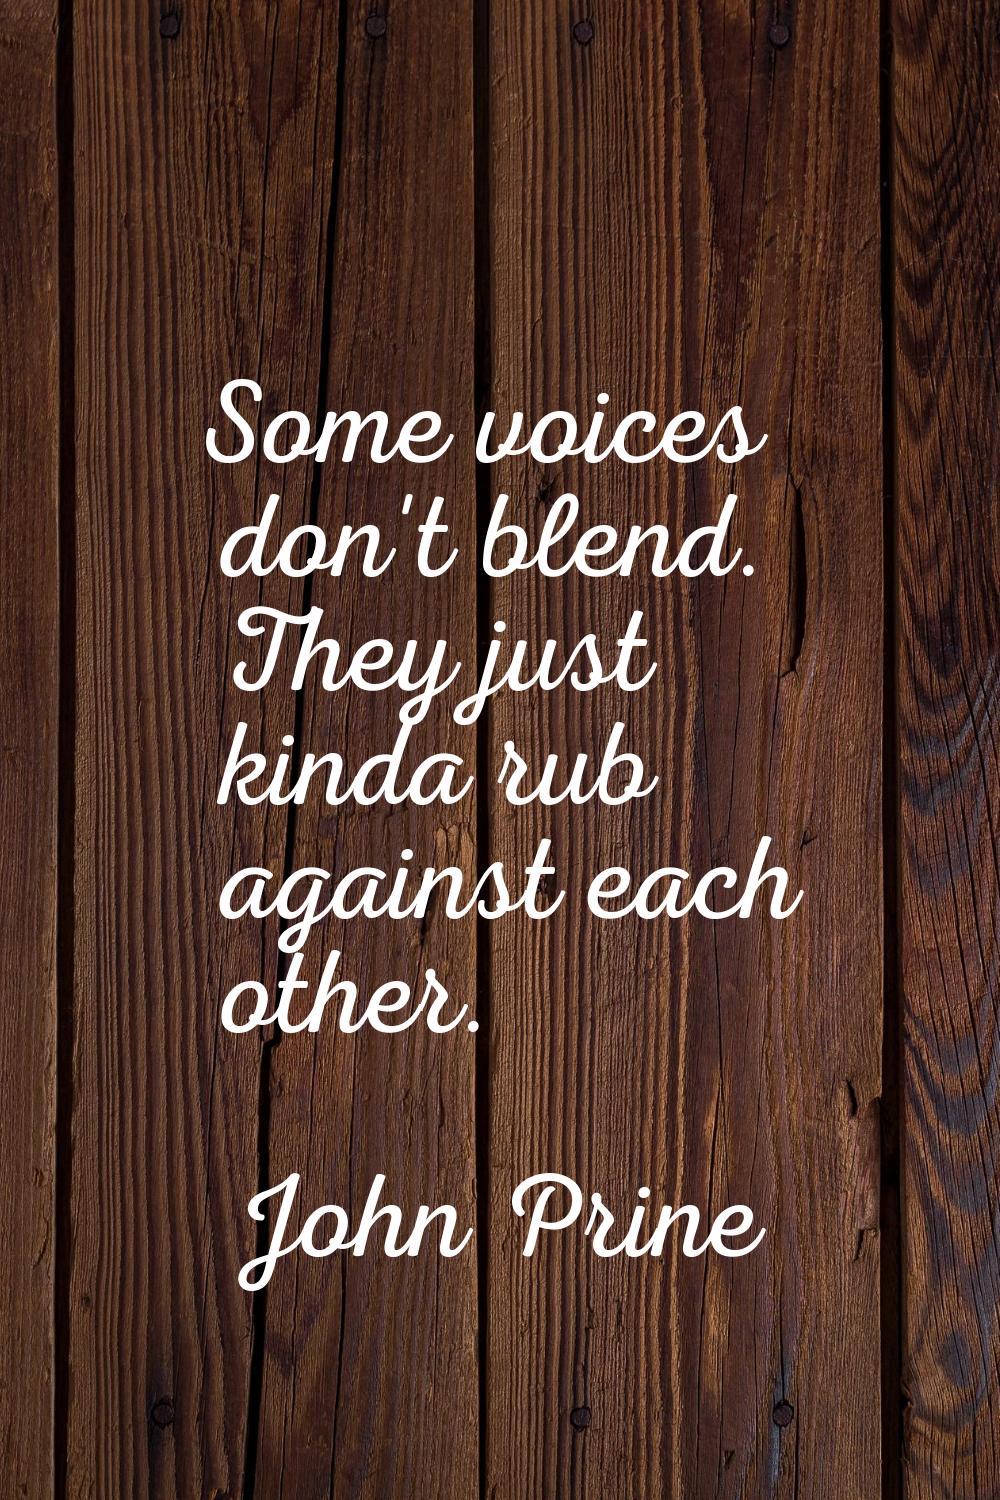 Some voices don't blend. They just kinda rub against each other.